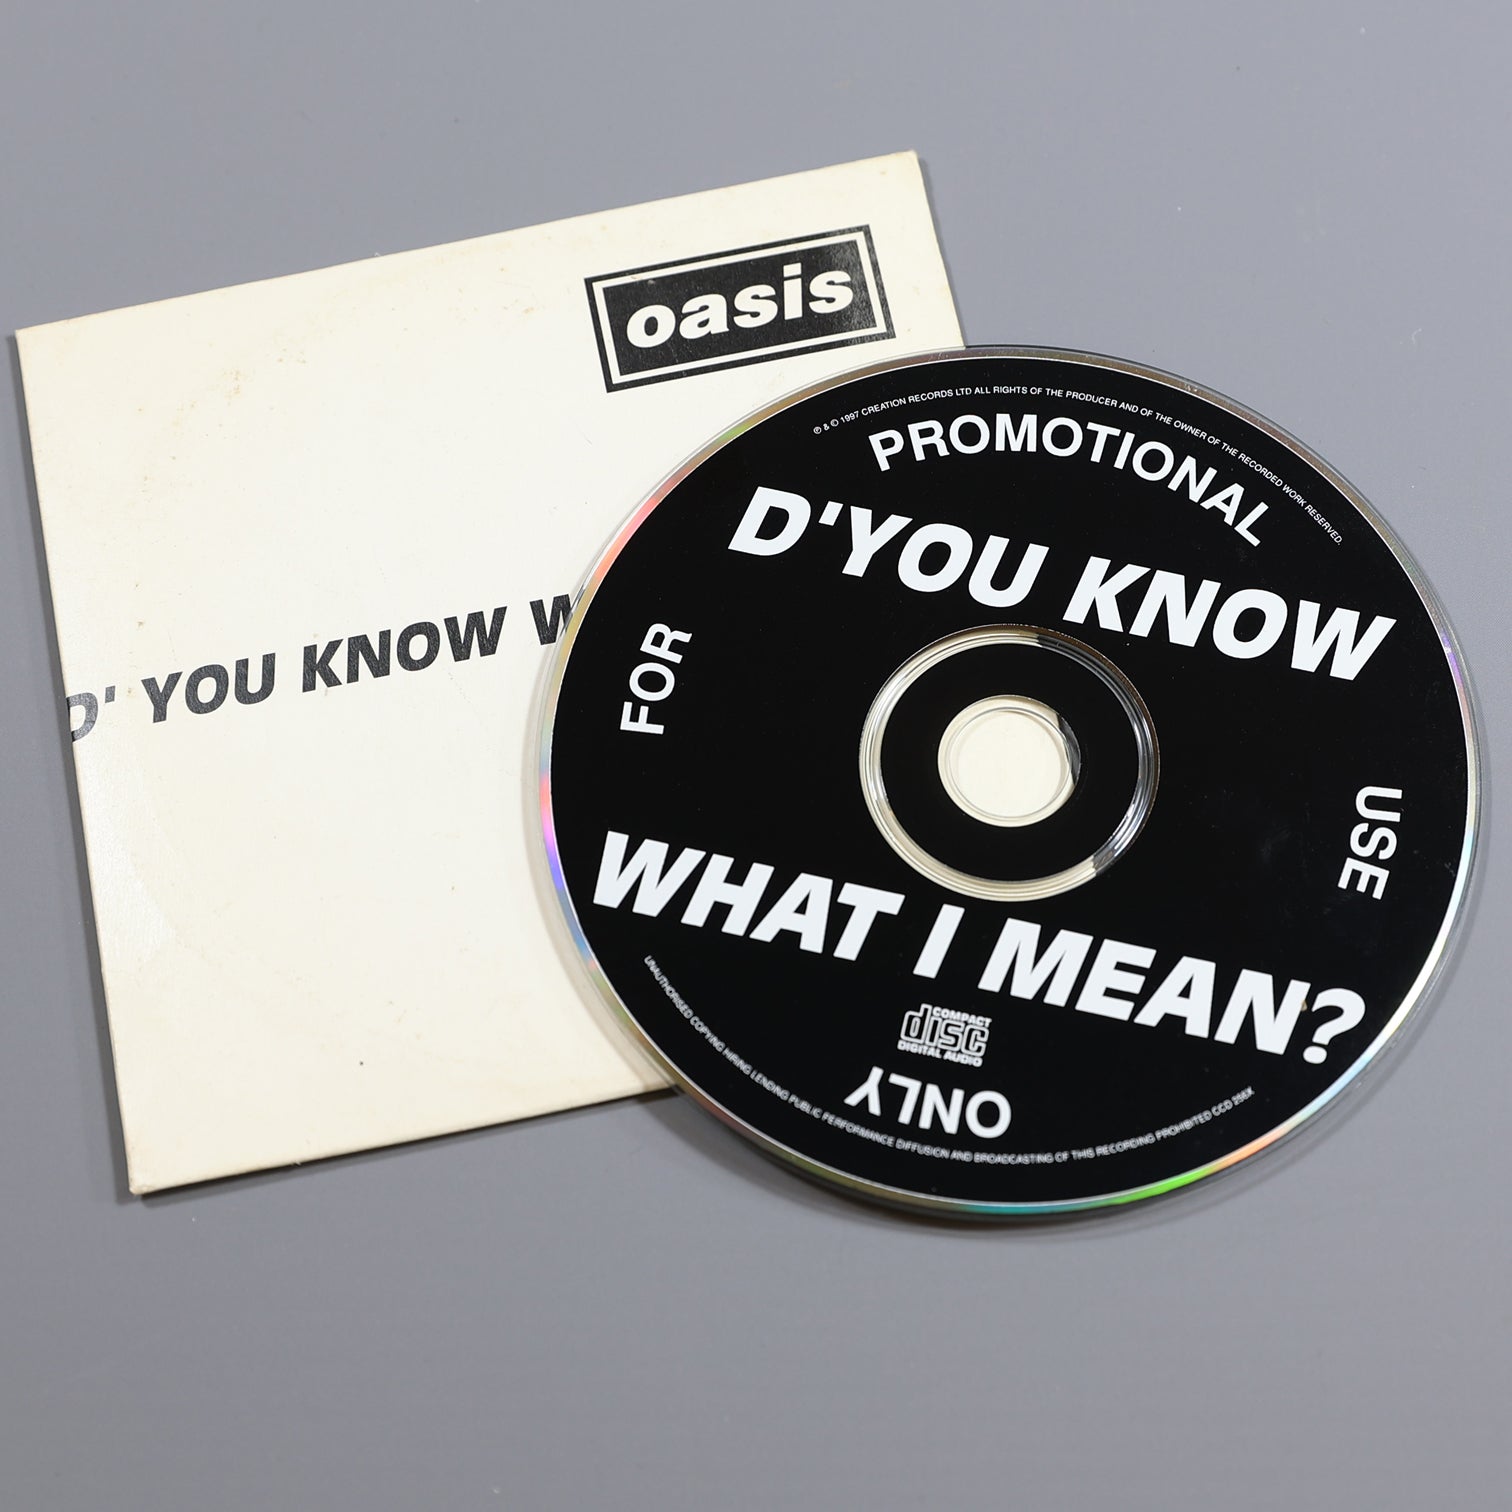 Oasis - D'You Know What I Mean? Promo CD 2 - New Item